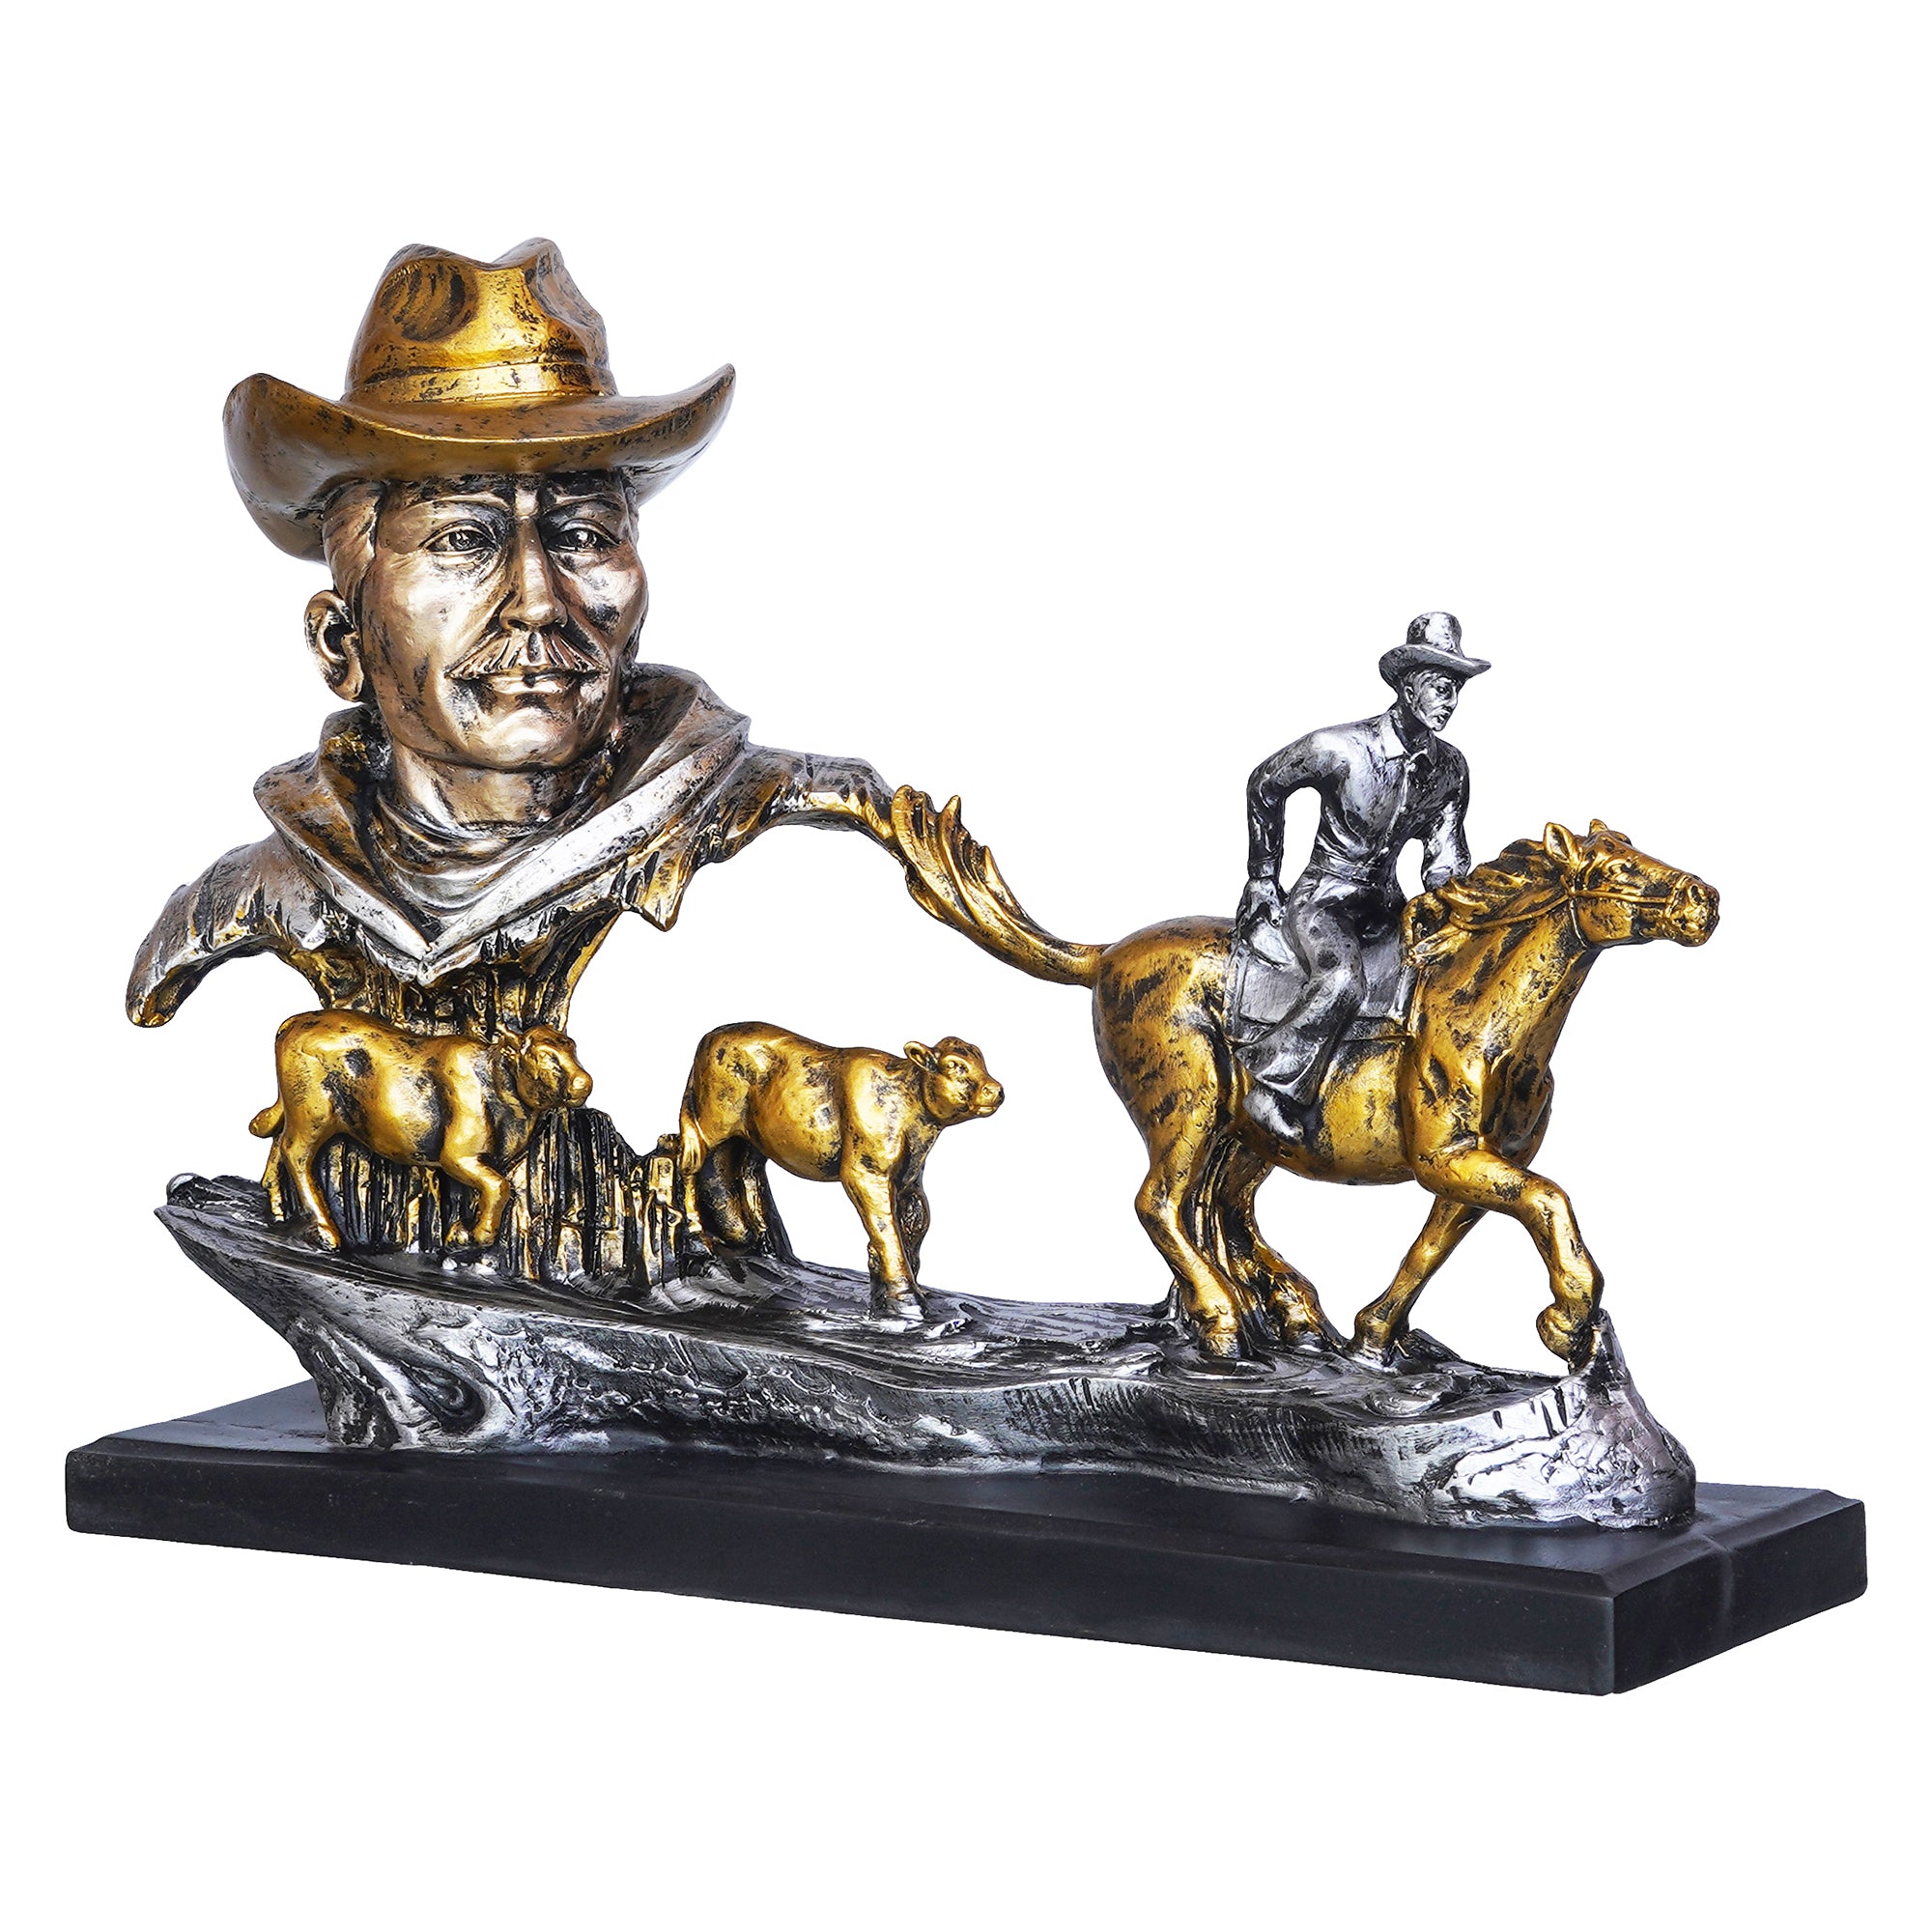 Antique Cowboys Face with Boy Sitting on Running Horse & Cow Statues Decorative Showpiece 6